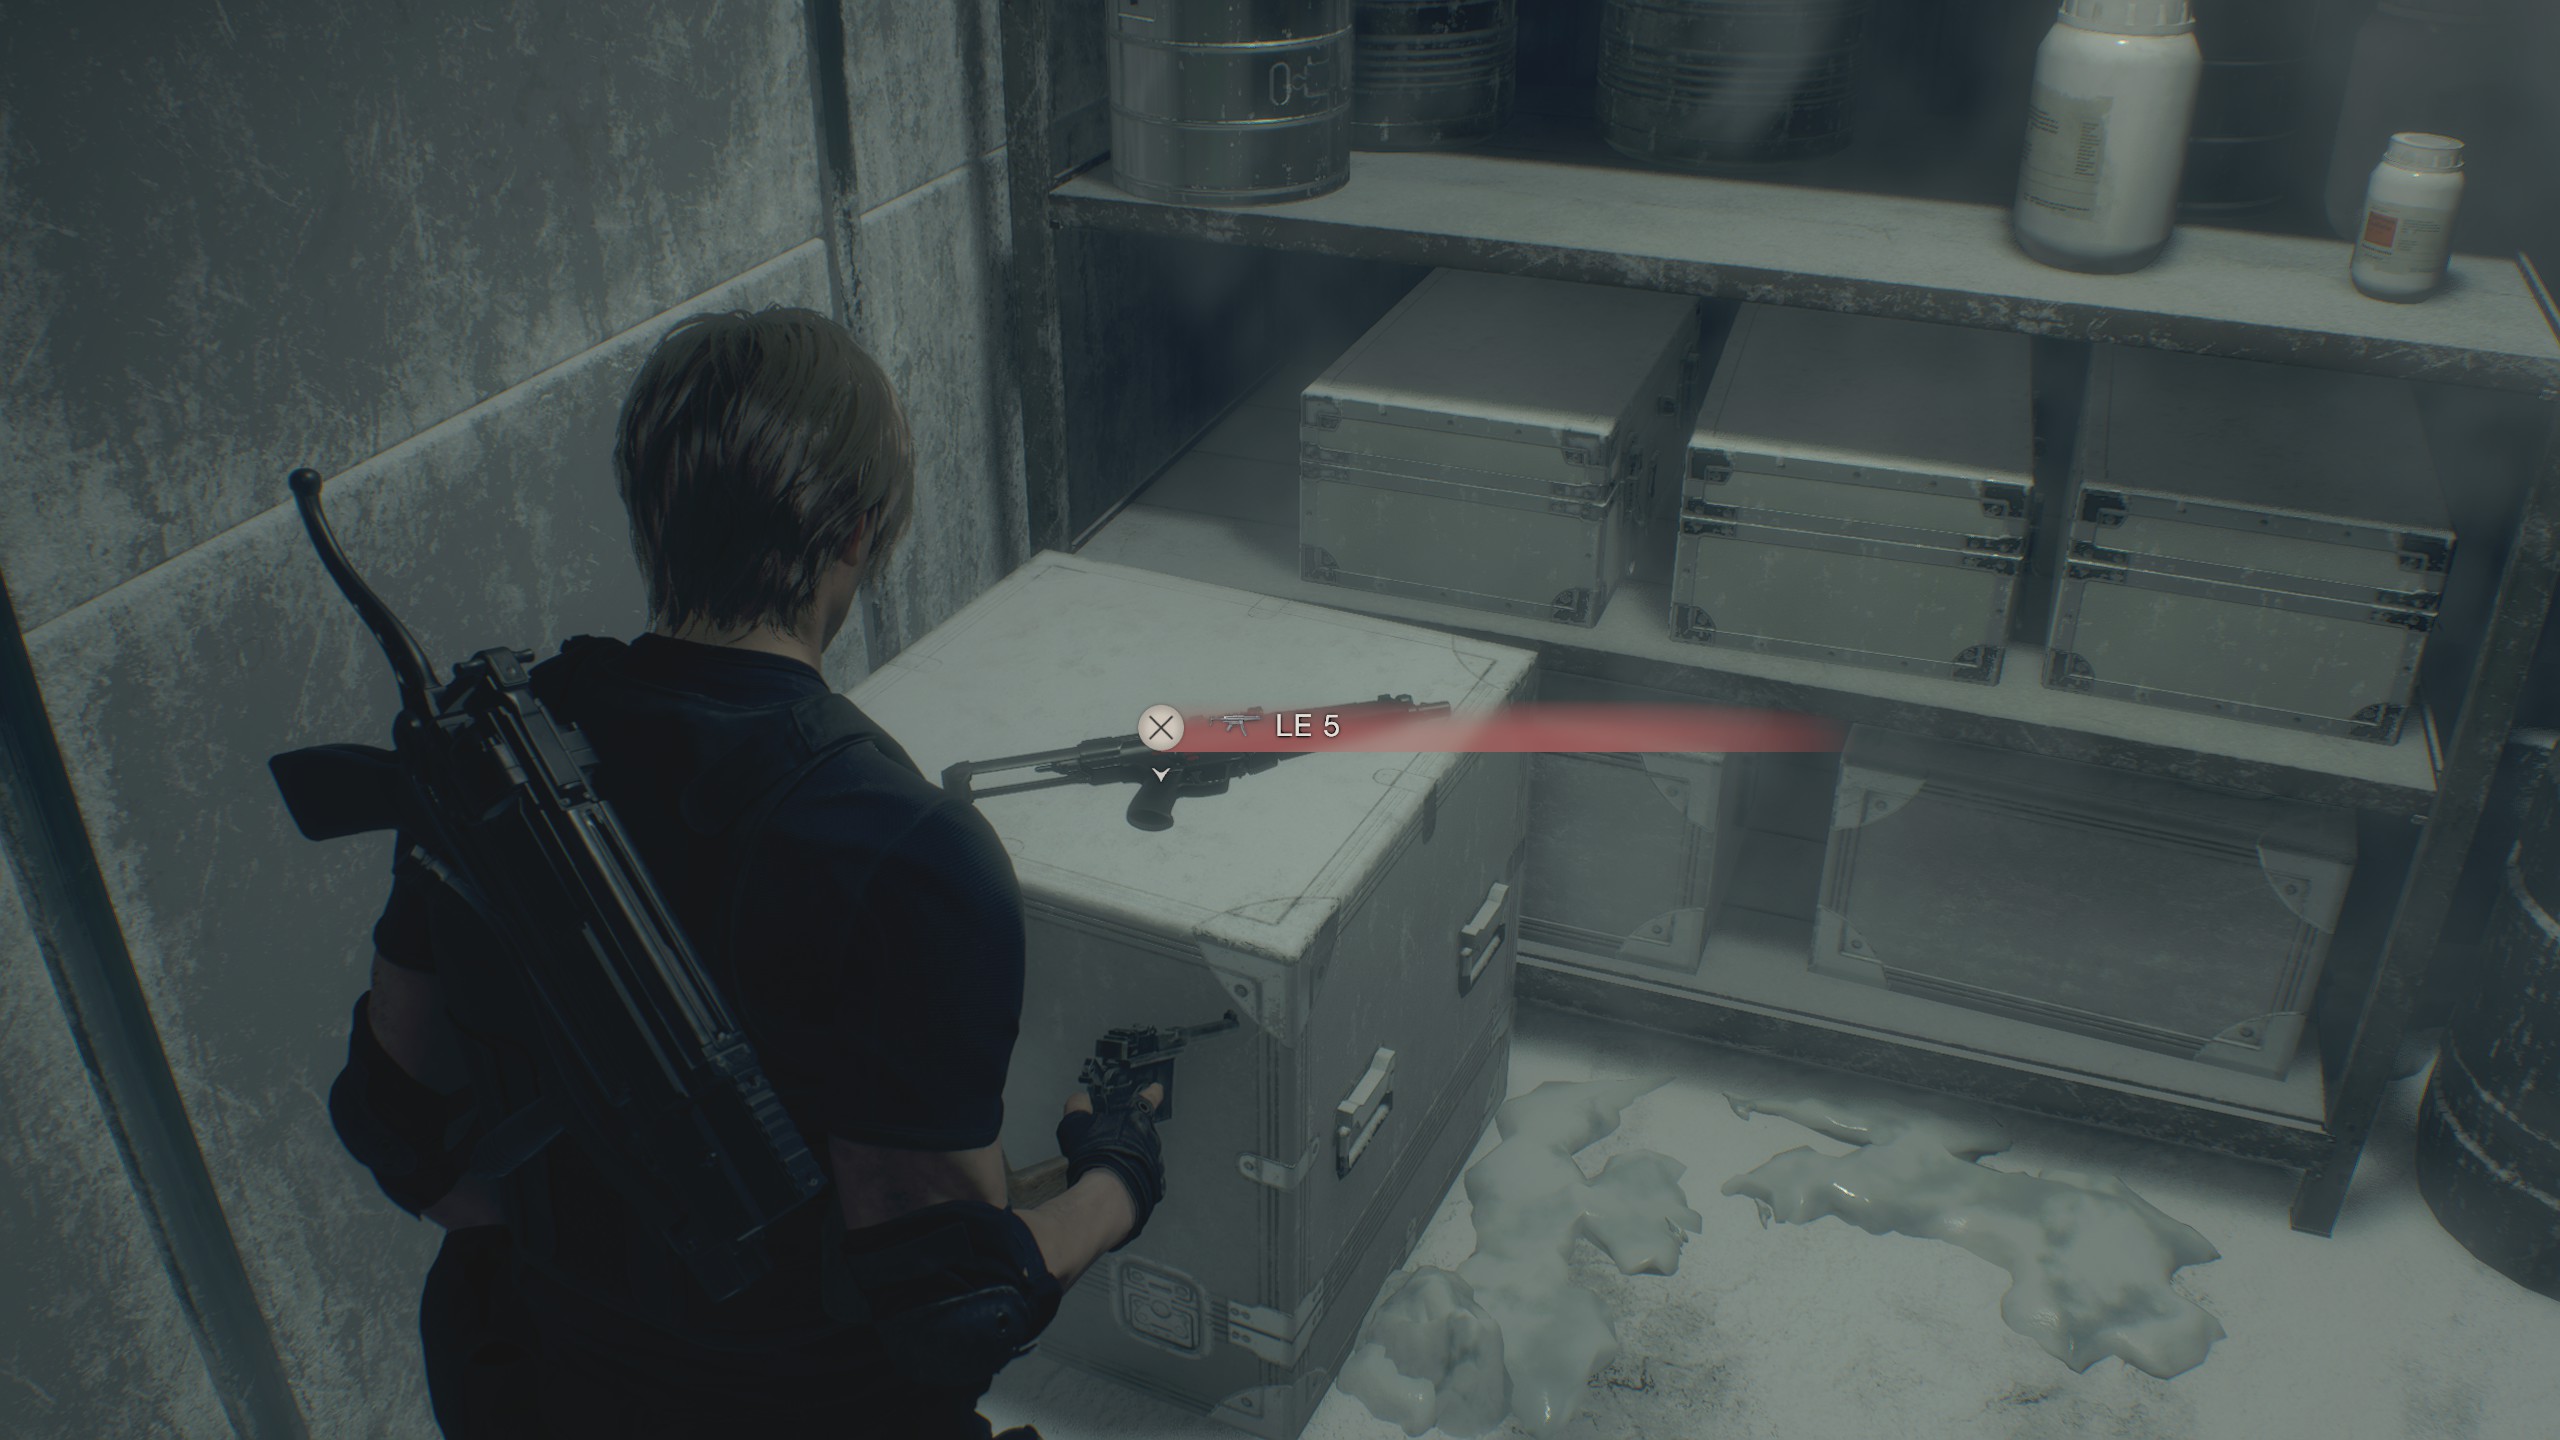 Resident Evil 4 Remake secret weapons - LE 5 in a freezer